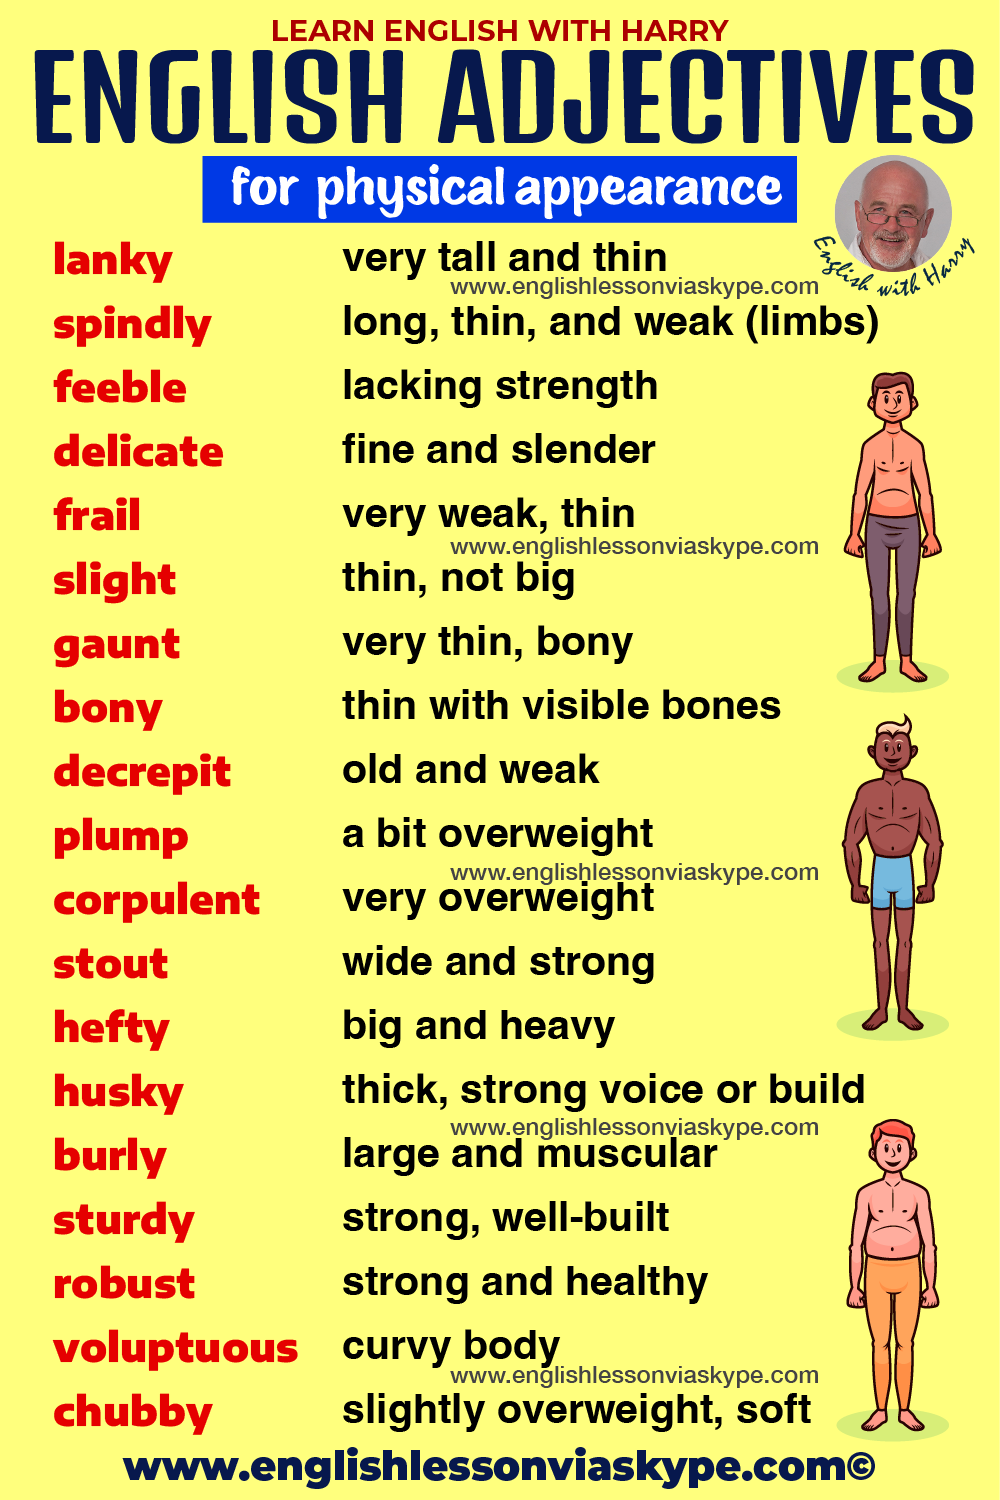 Describing People’s Appearance In English. Adjectives to describe physical appearance in English. English speaking skills #learnenglish #vocabulary